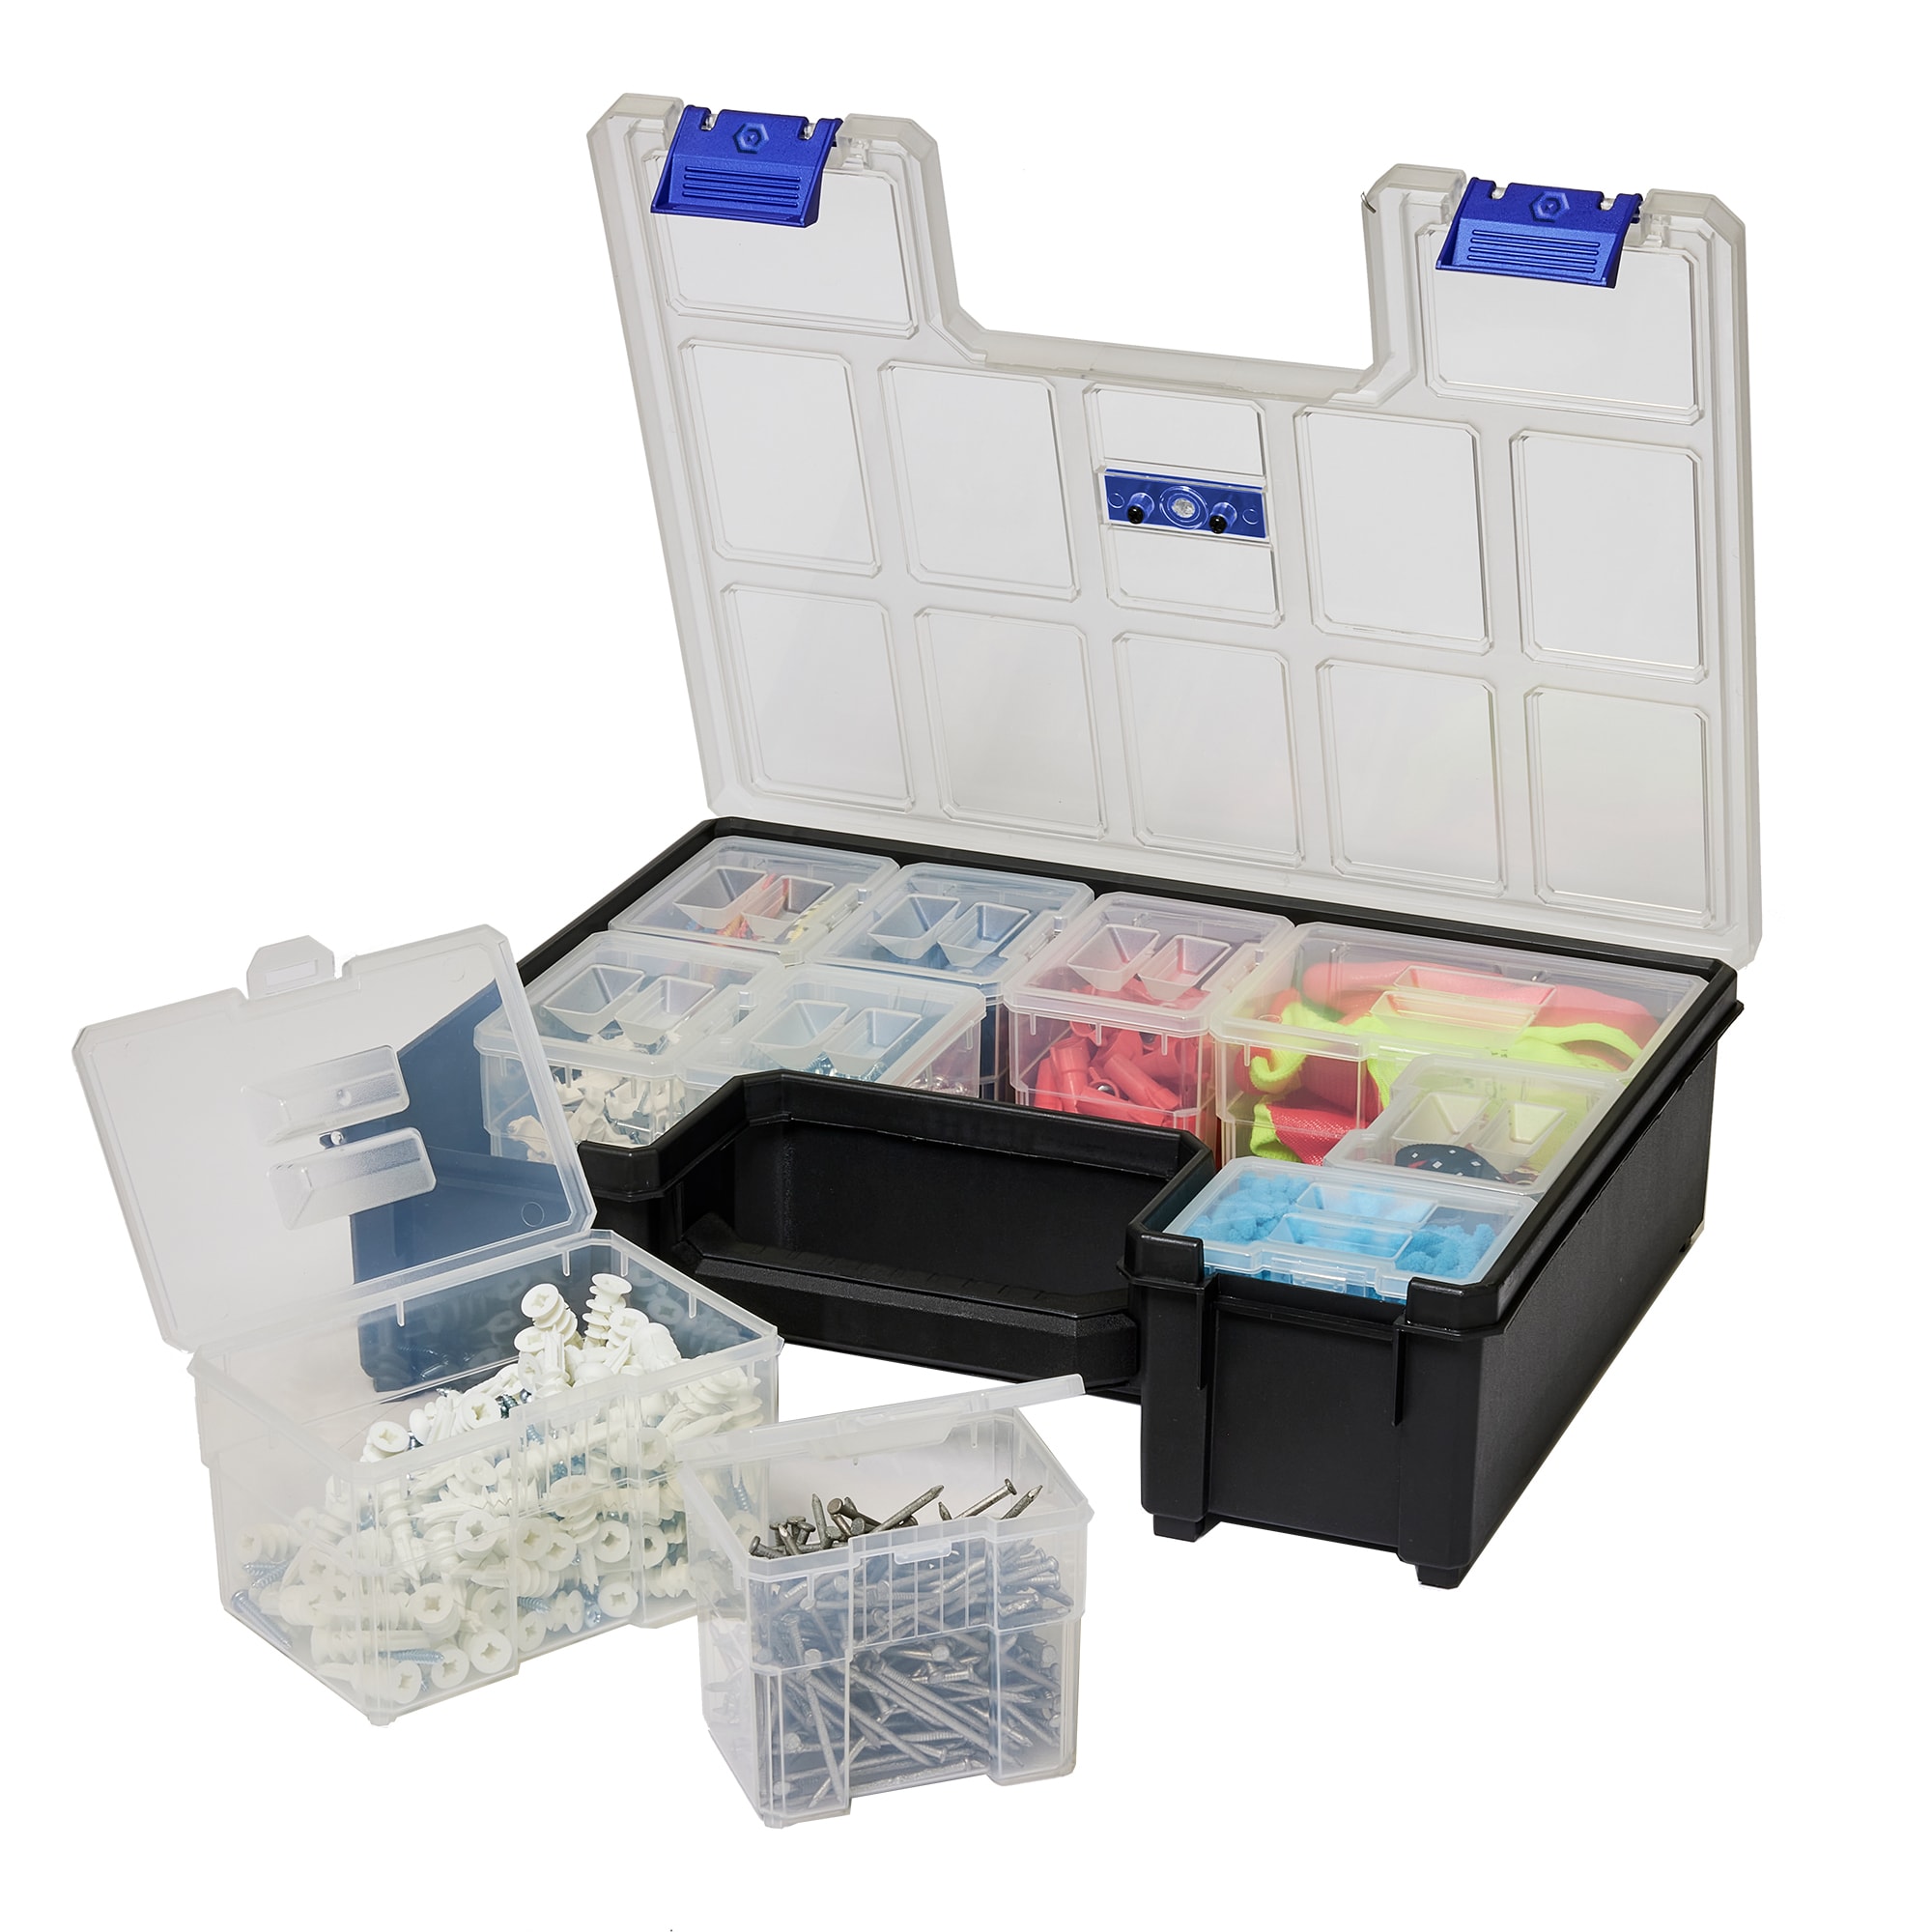 Shop Kobalt Plastic Storage Container and Shelf Collection at